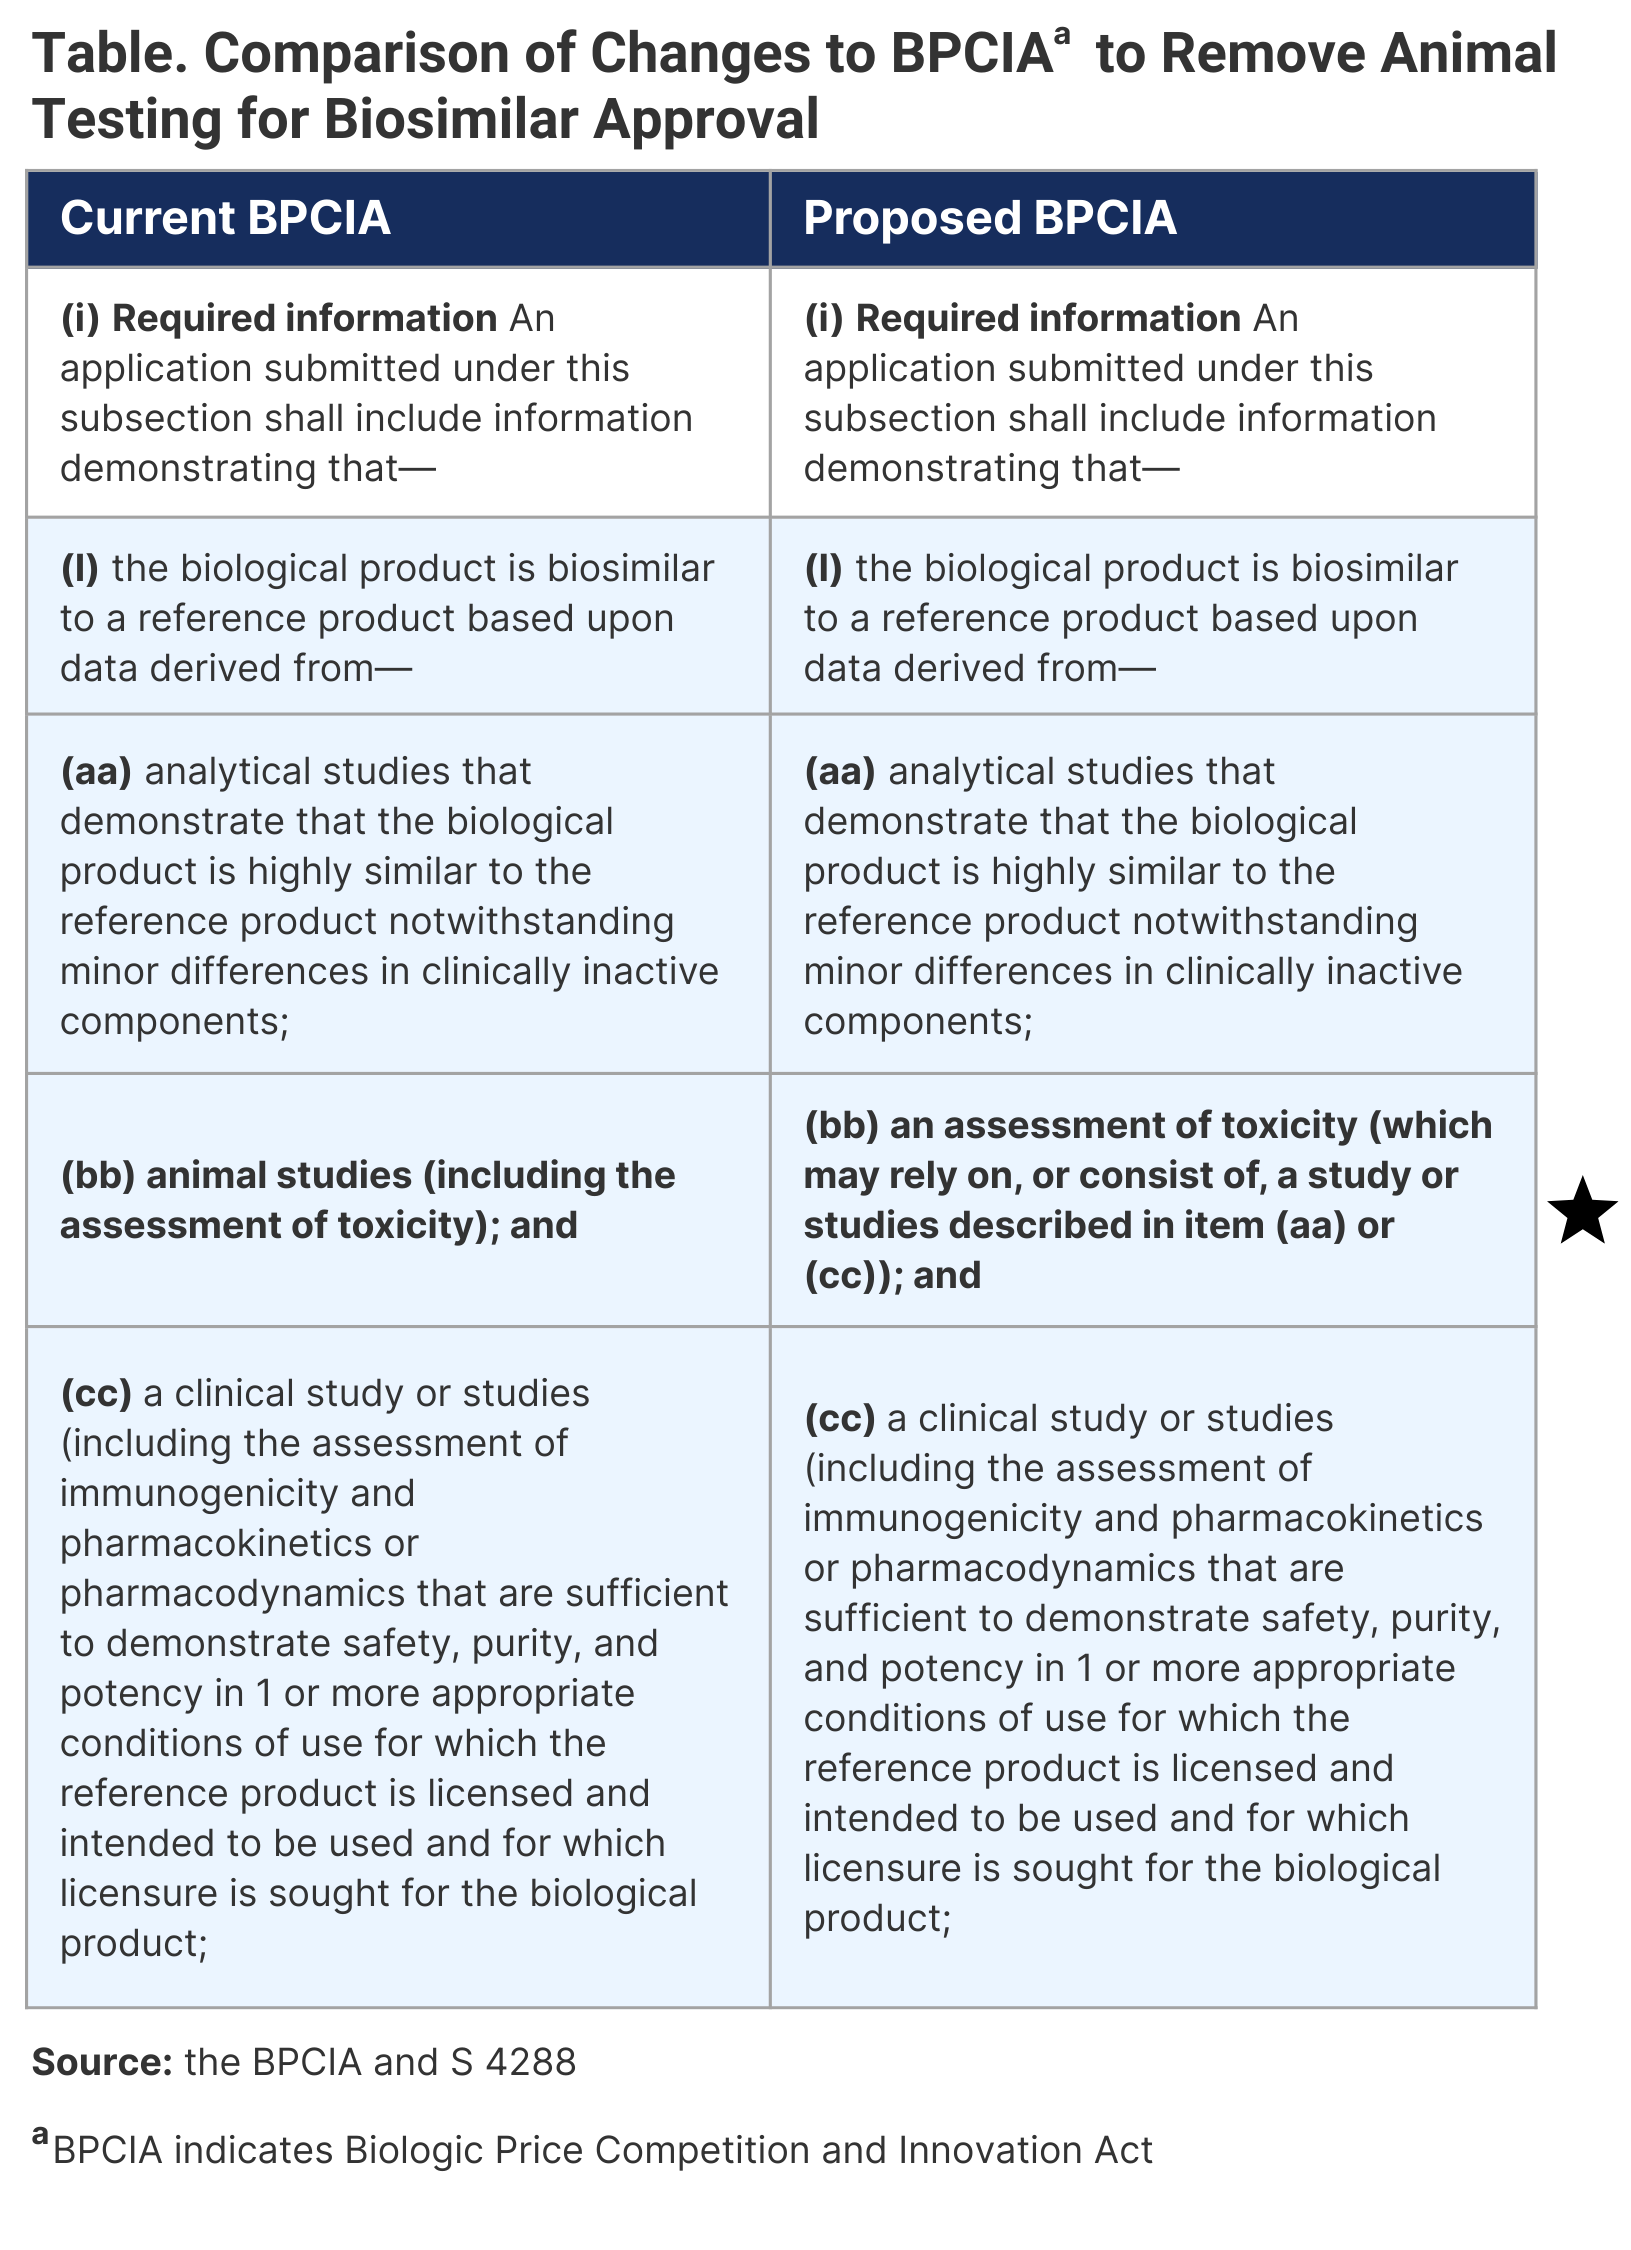 Table. Comparison of changes to BPCIA to remove animal testing of biosimilars